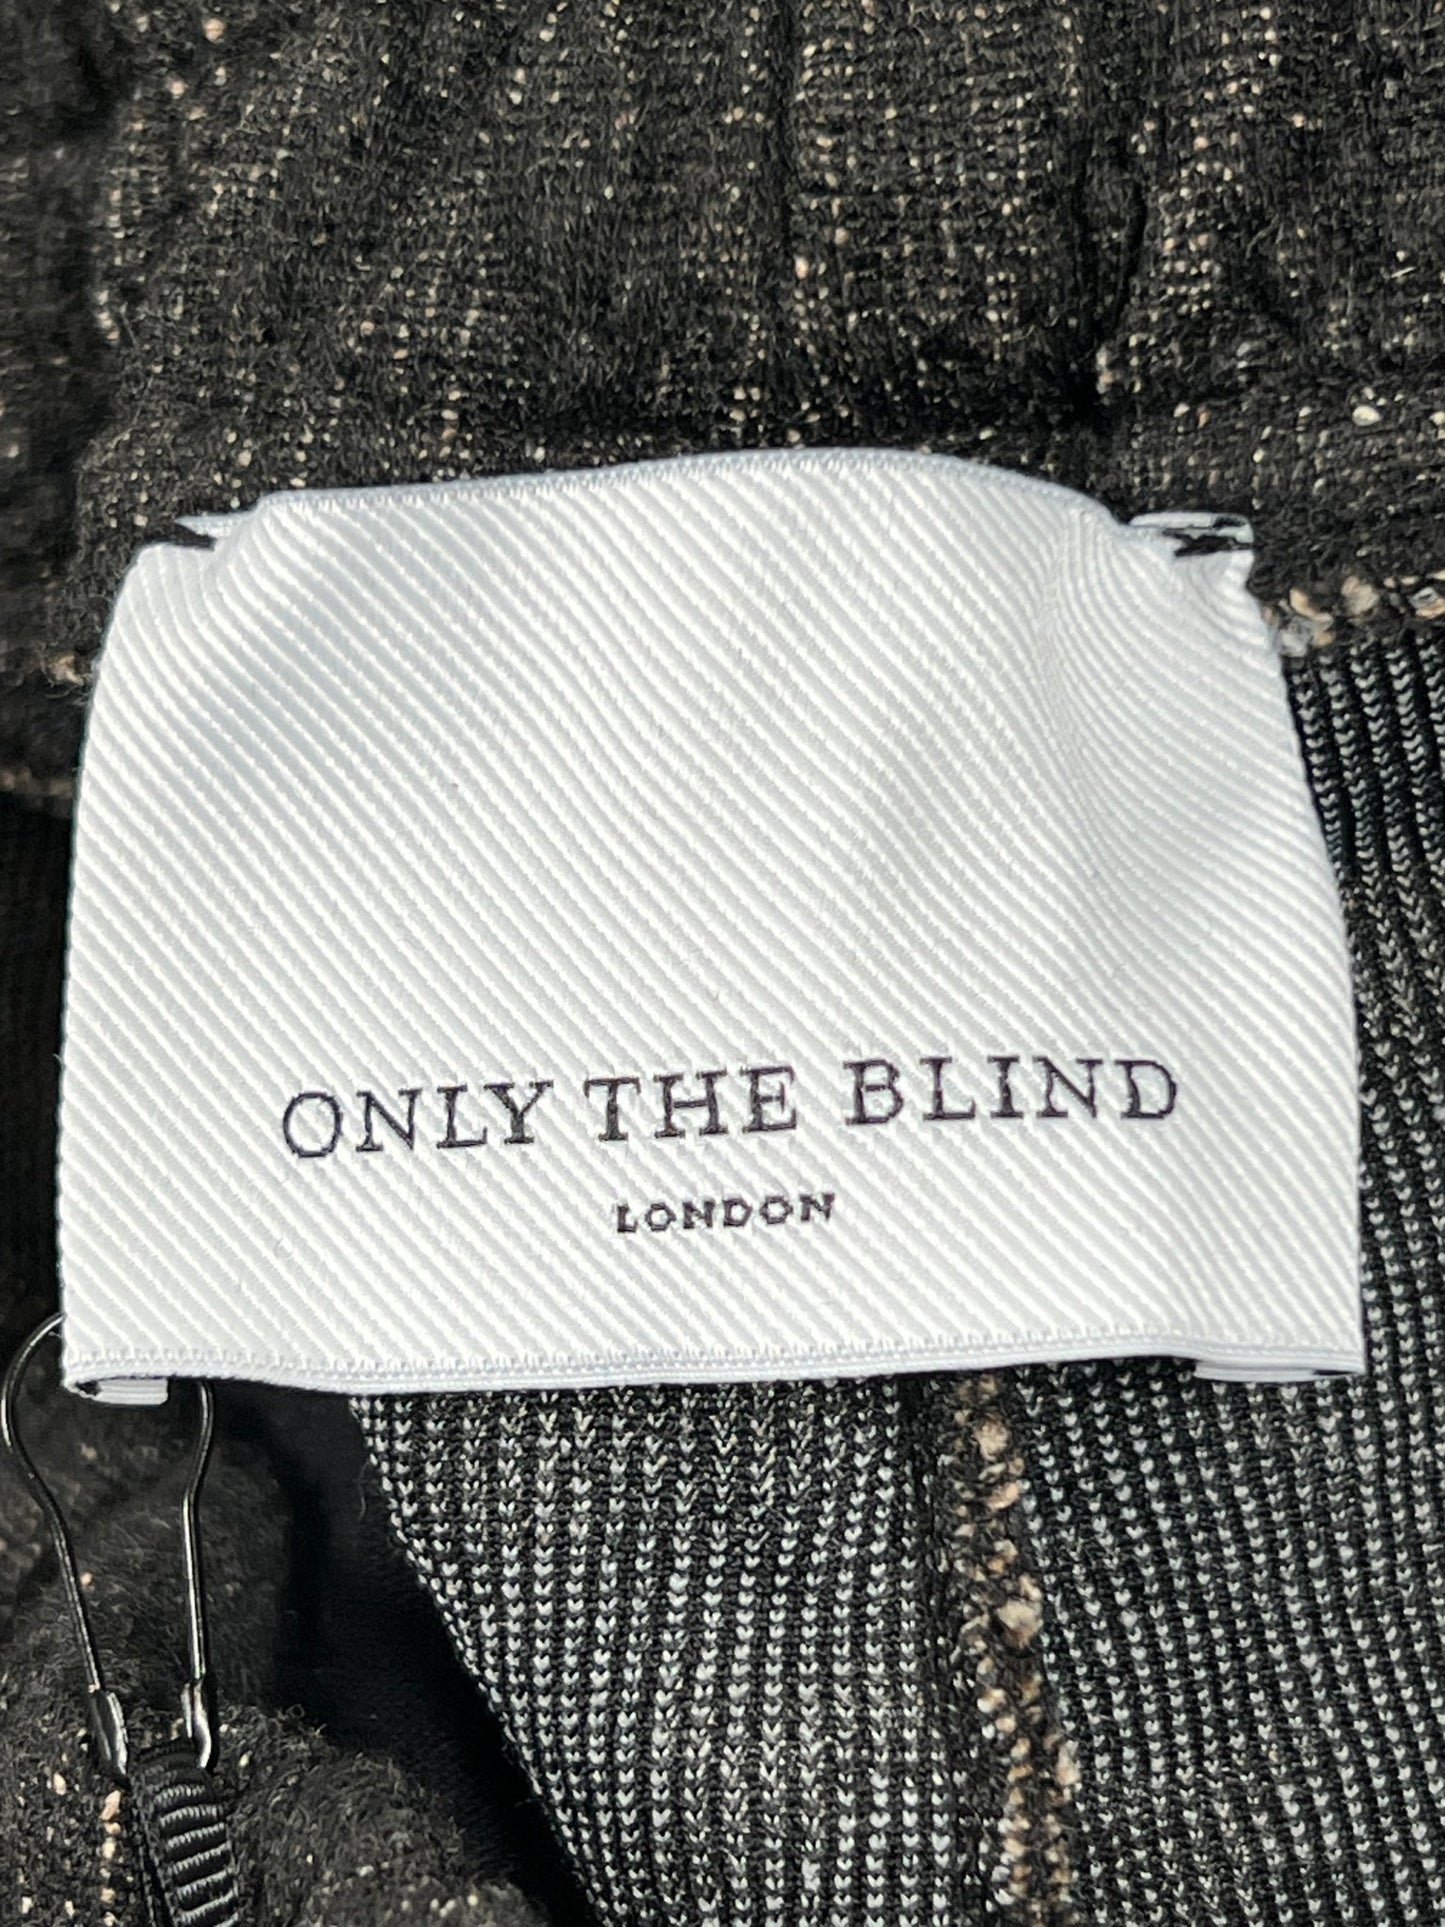 A sleek ONLY THE BLIND label with white text on it.